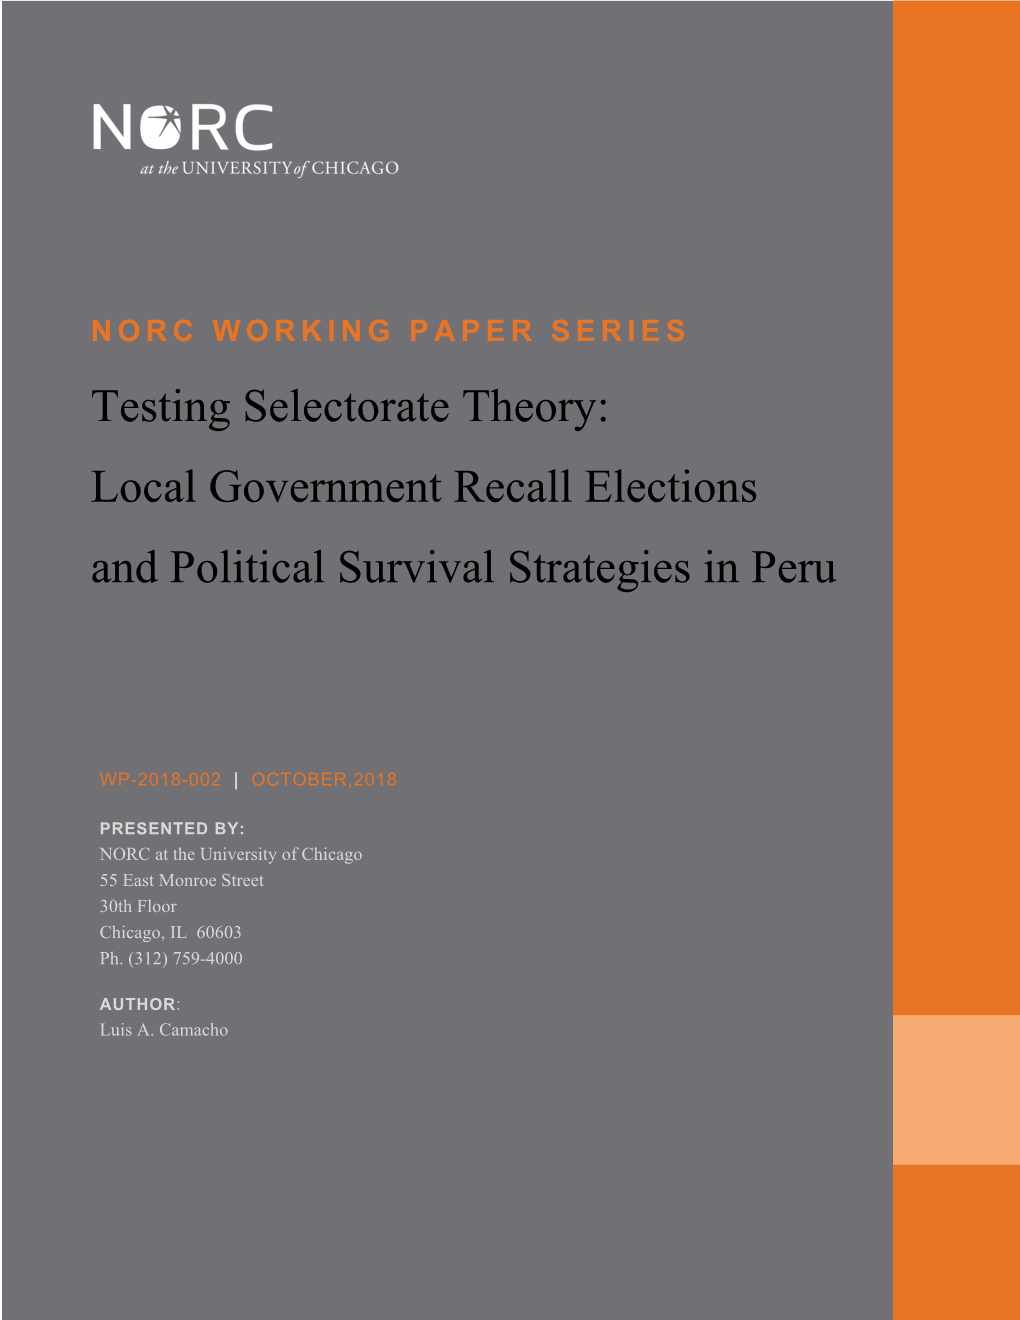 Local Government Recall Elections and Political Survival Strategies in Peru